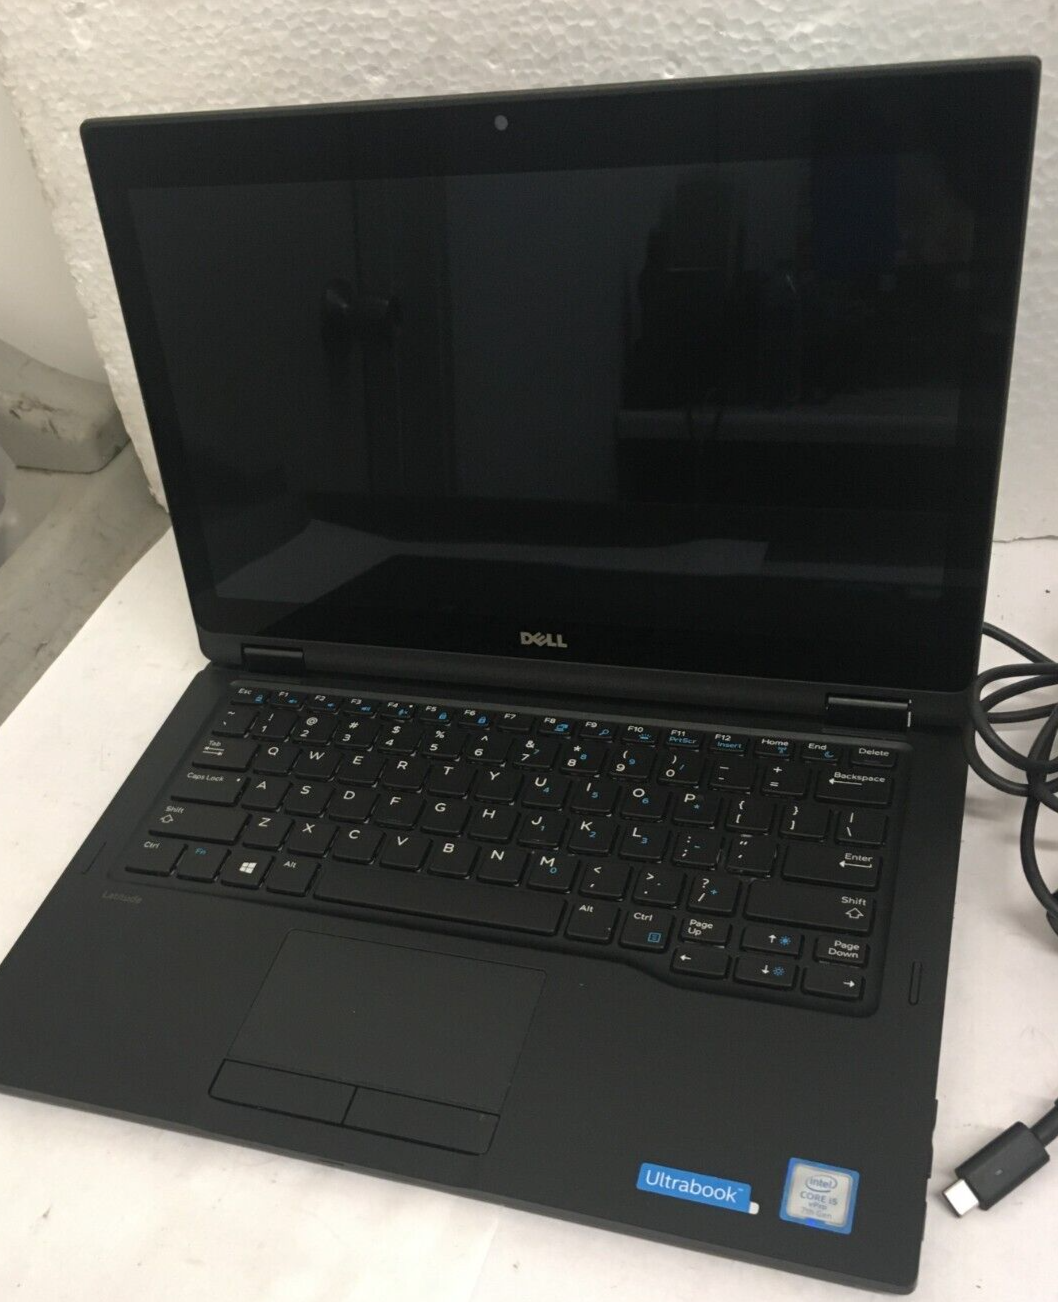 DELL Latitude 5289 (07AA) 12.8inch used laptop good working condition w/power - $96.57